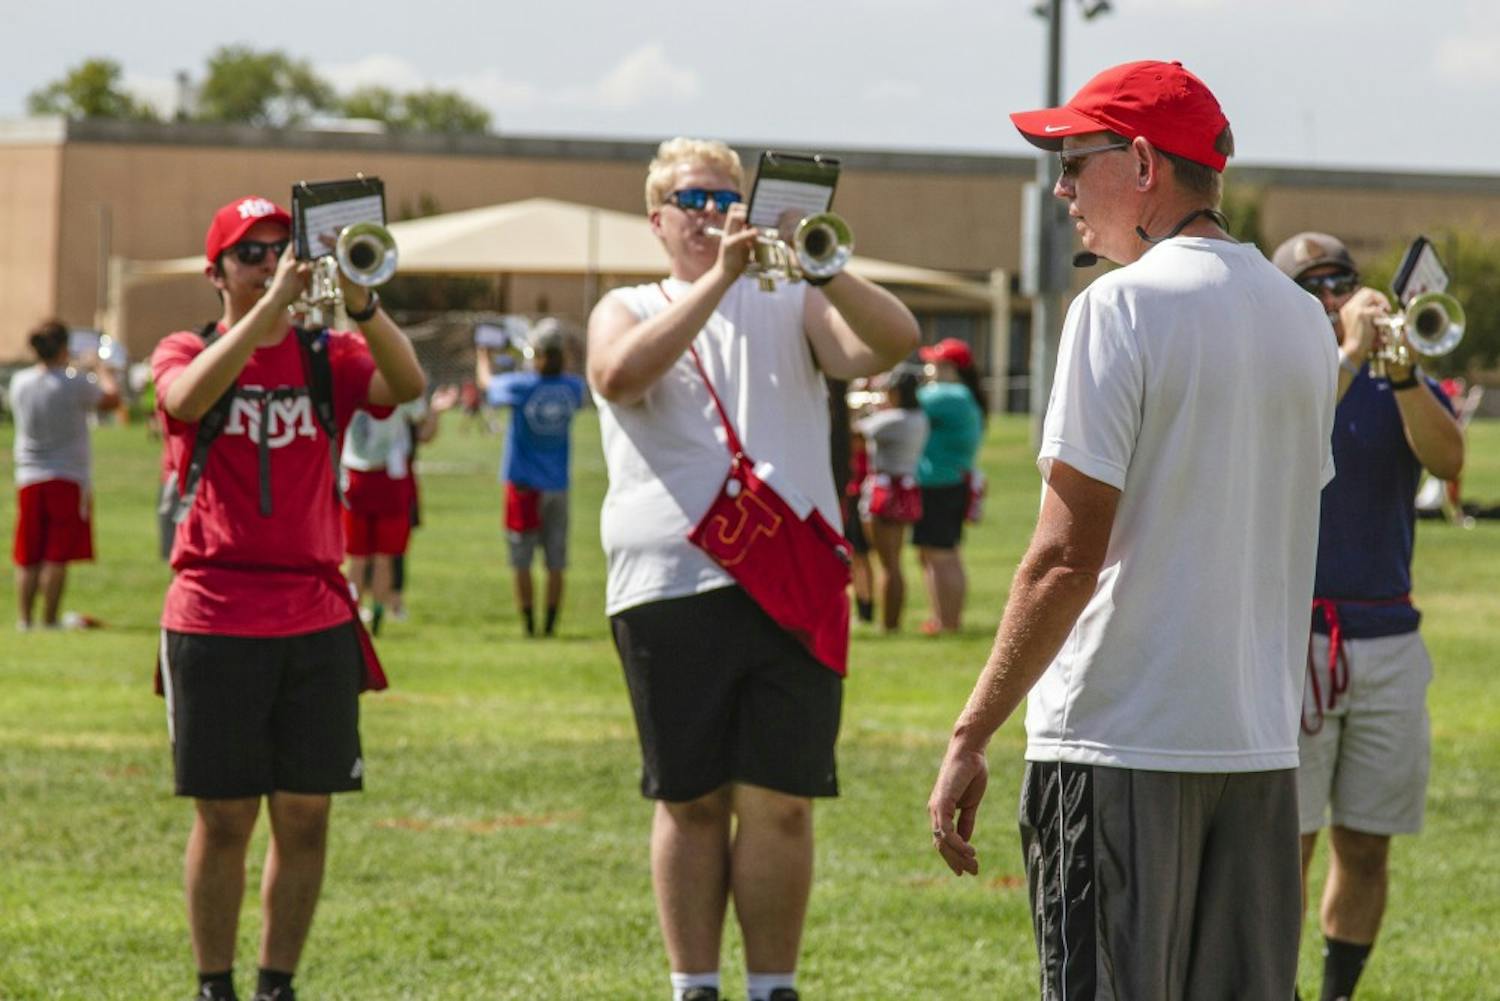 Director Chad Simons works with the UNM Spirit Band on Wednesday Aug. 22, 2018.